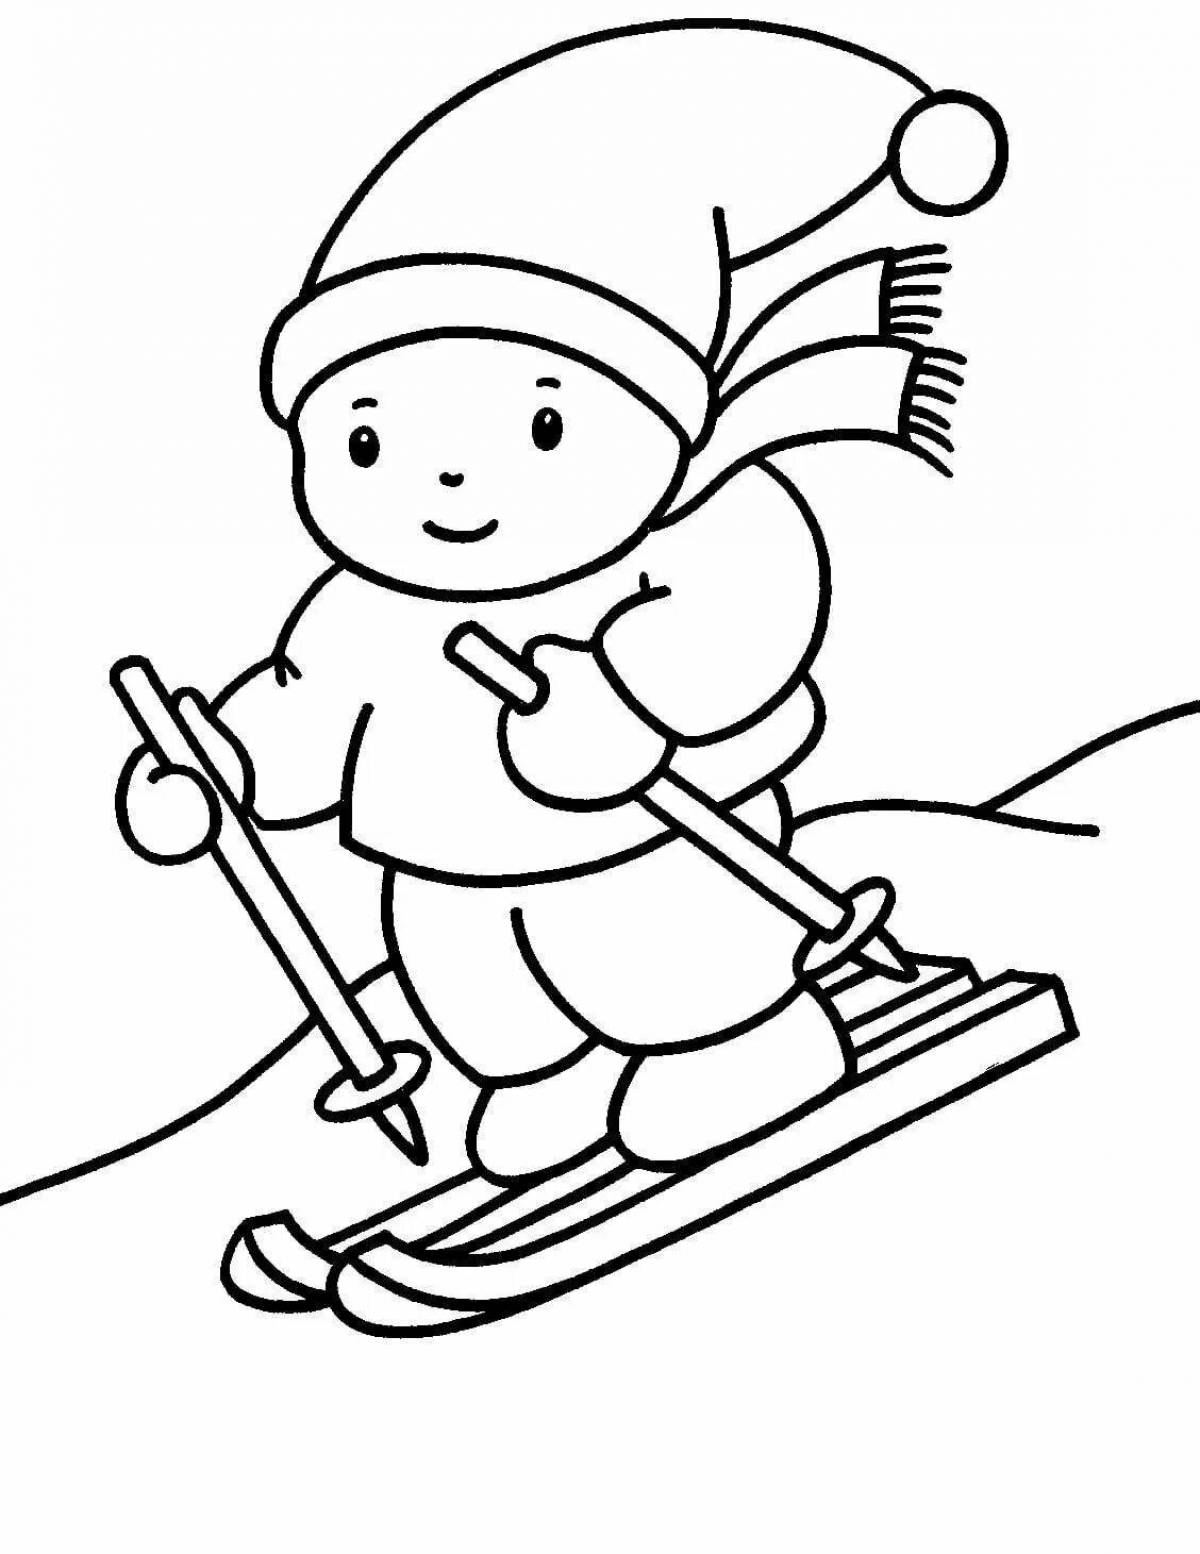 Playful winter sports coloring page for preschoolers